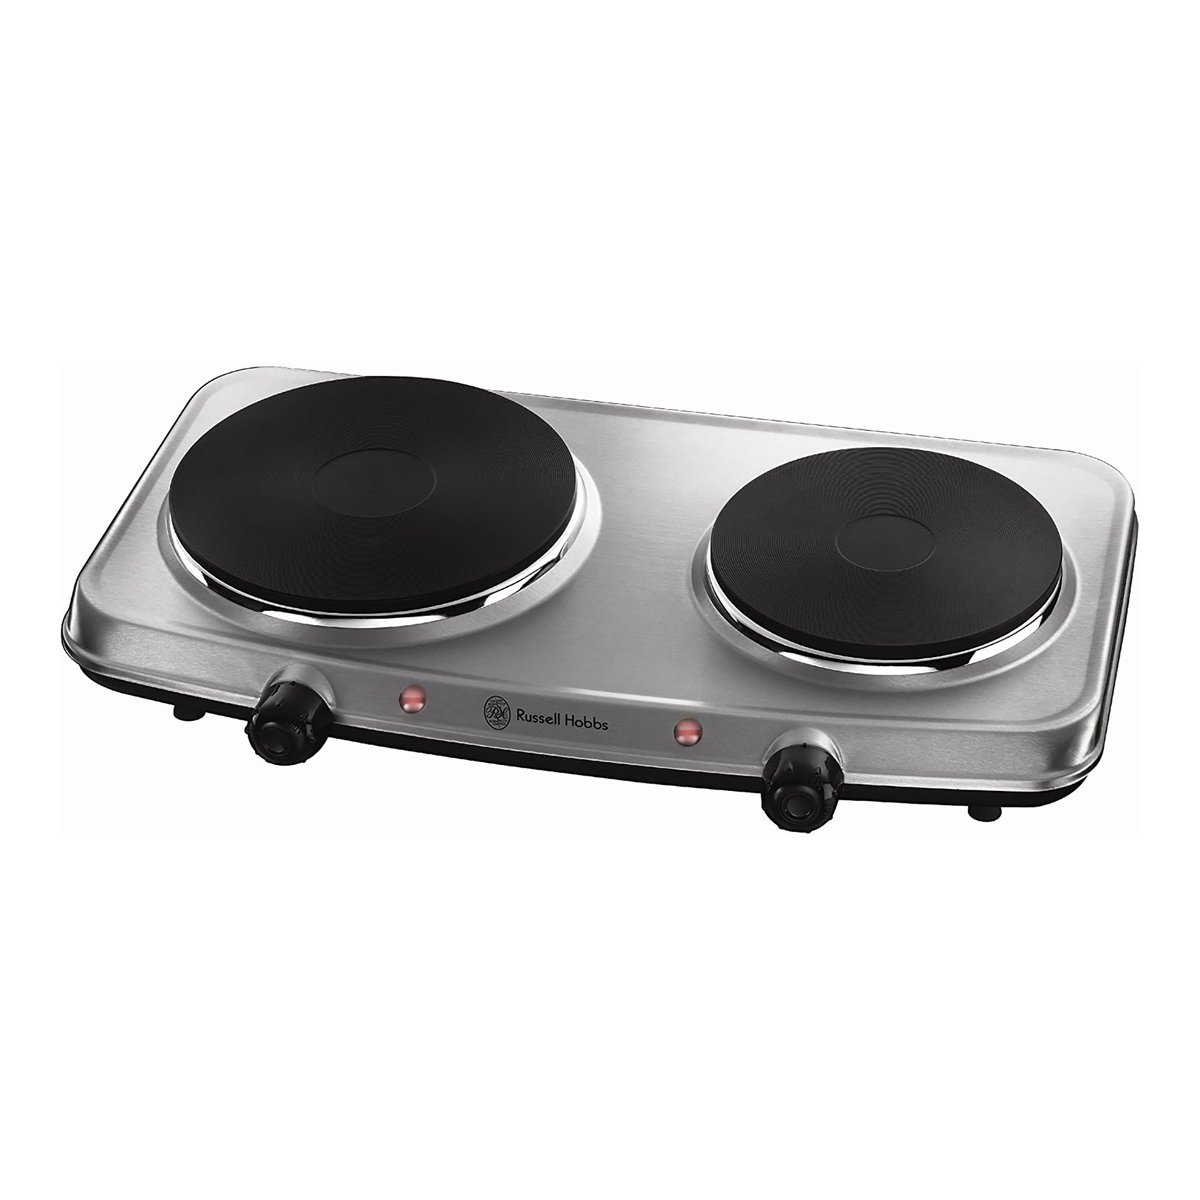 Russell Hobbs Mini Electric Hot Plate 15199 2 Plate